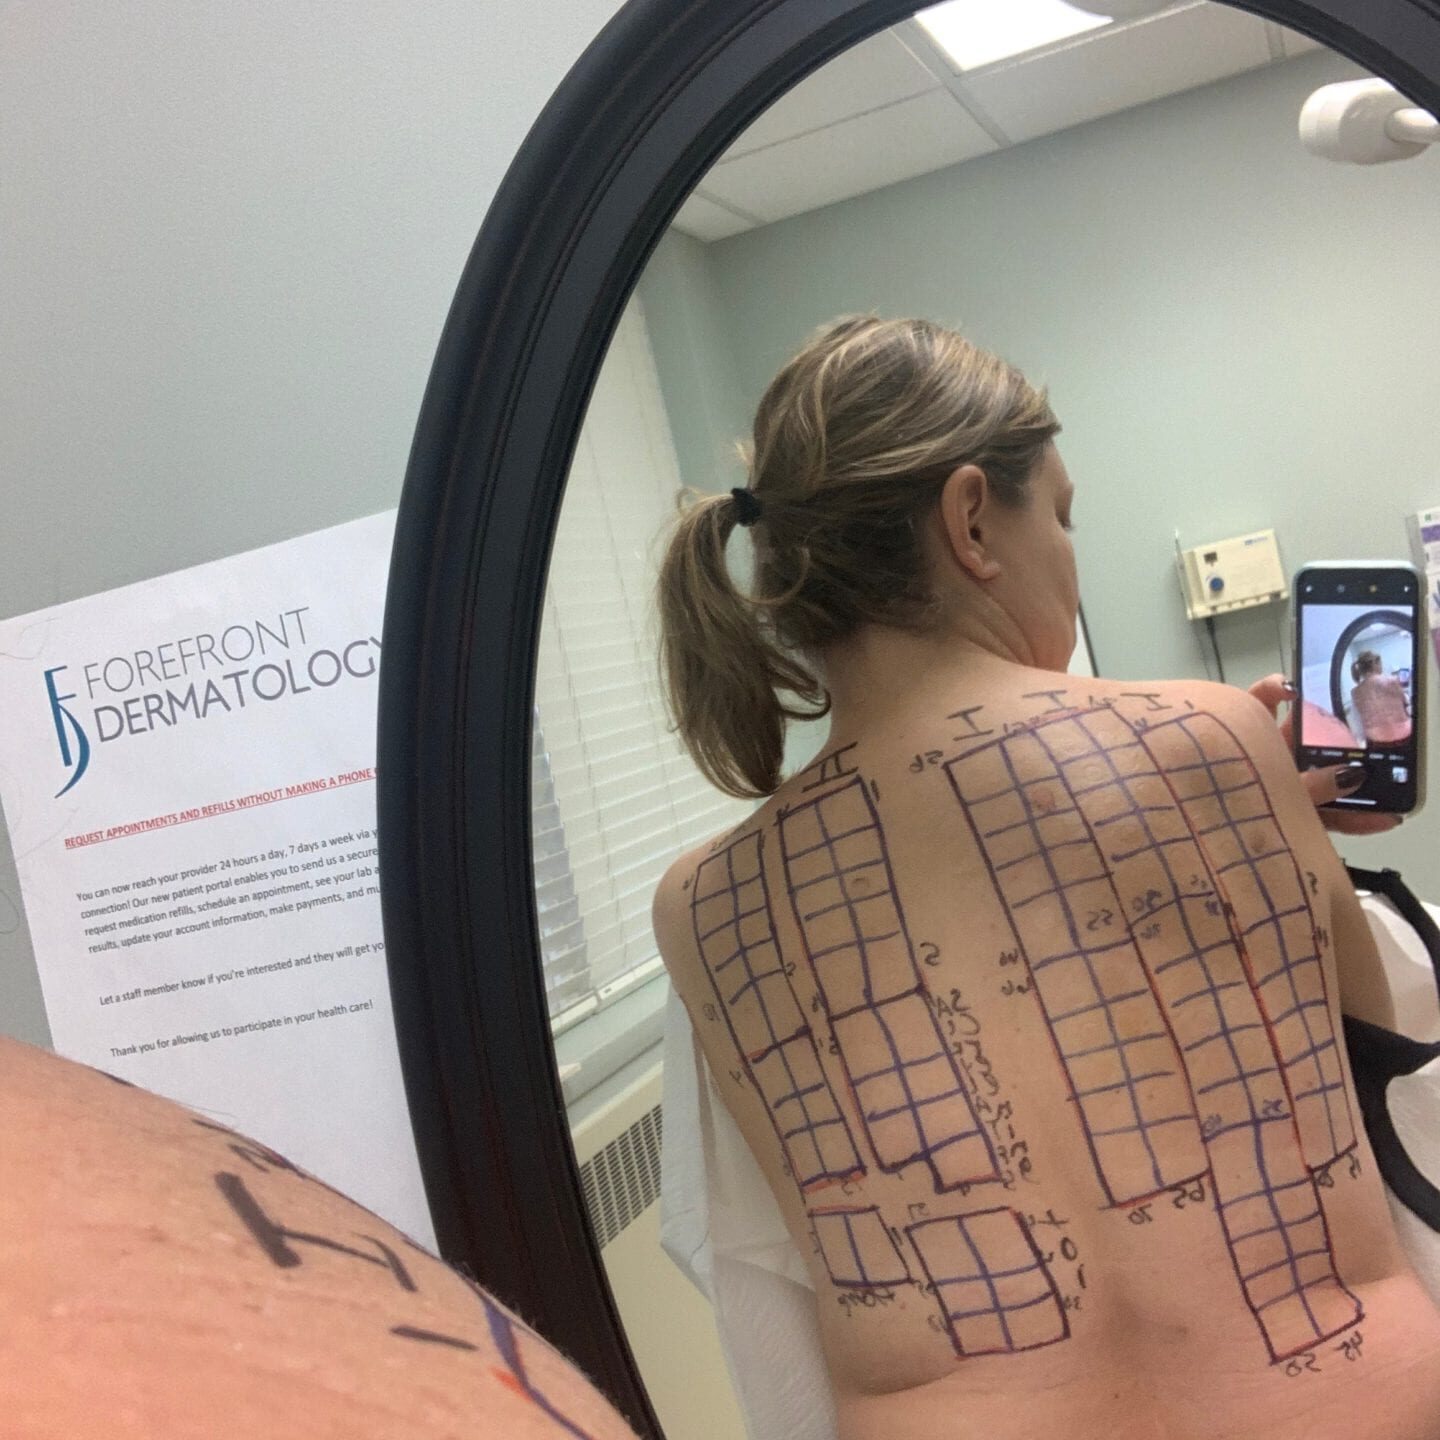 image of the map for a dermatology patch test